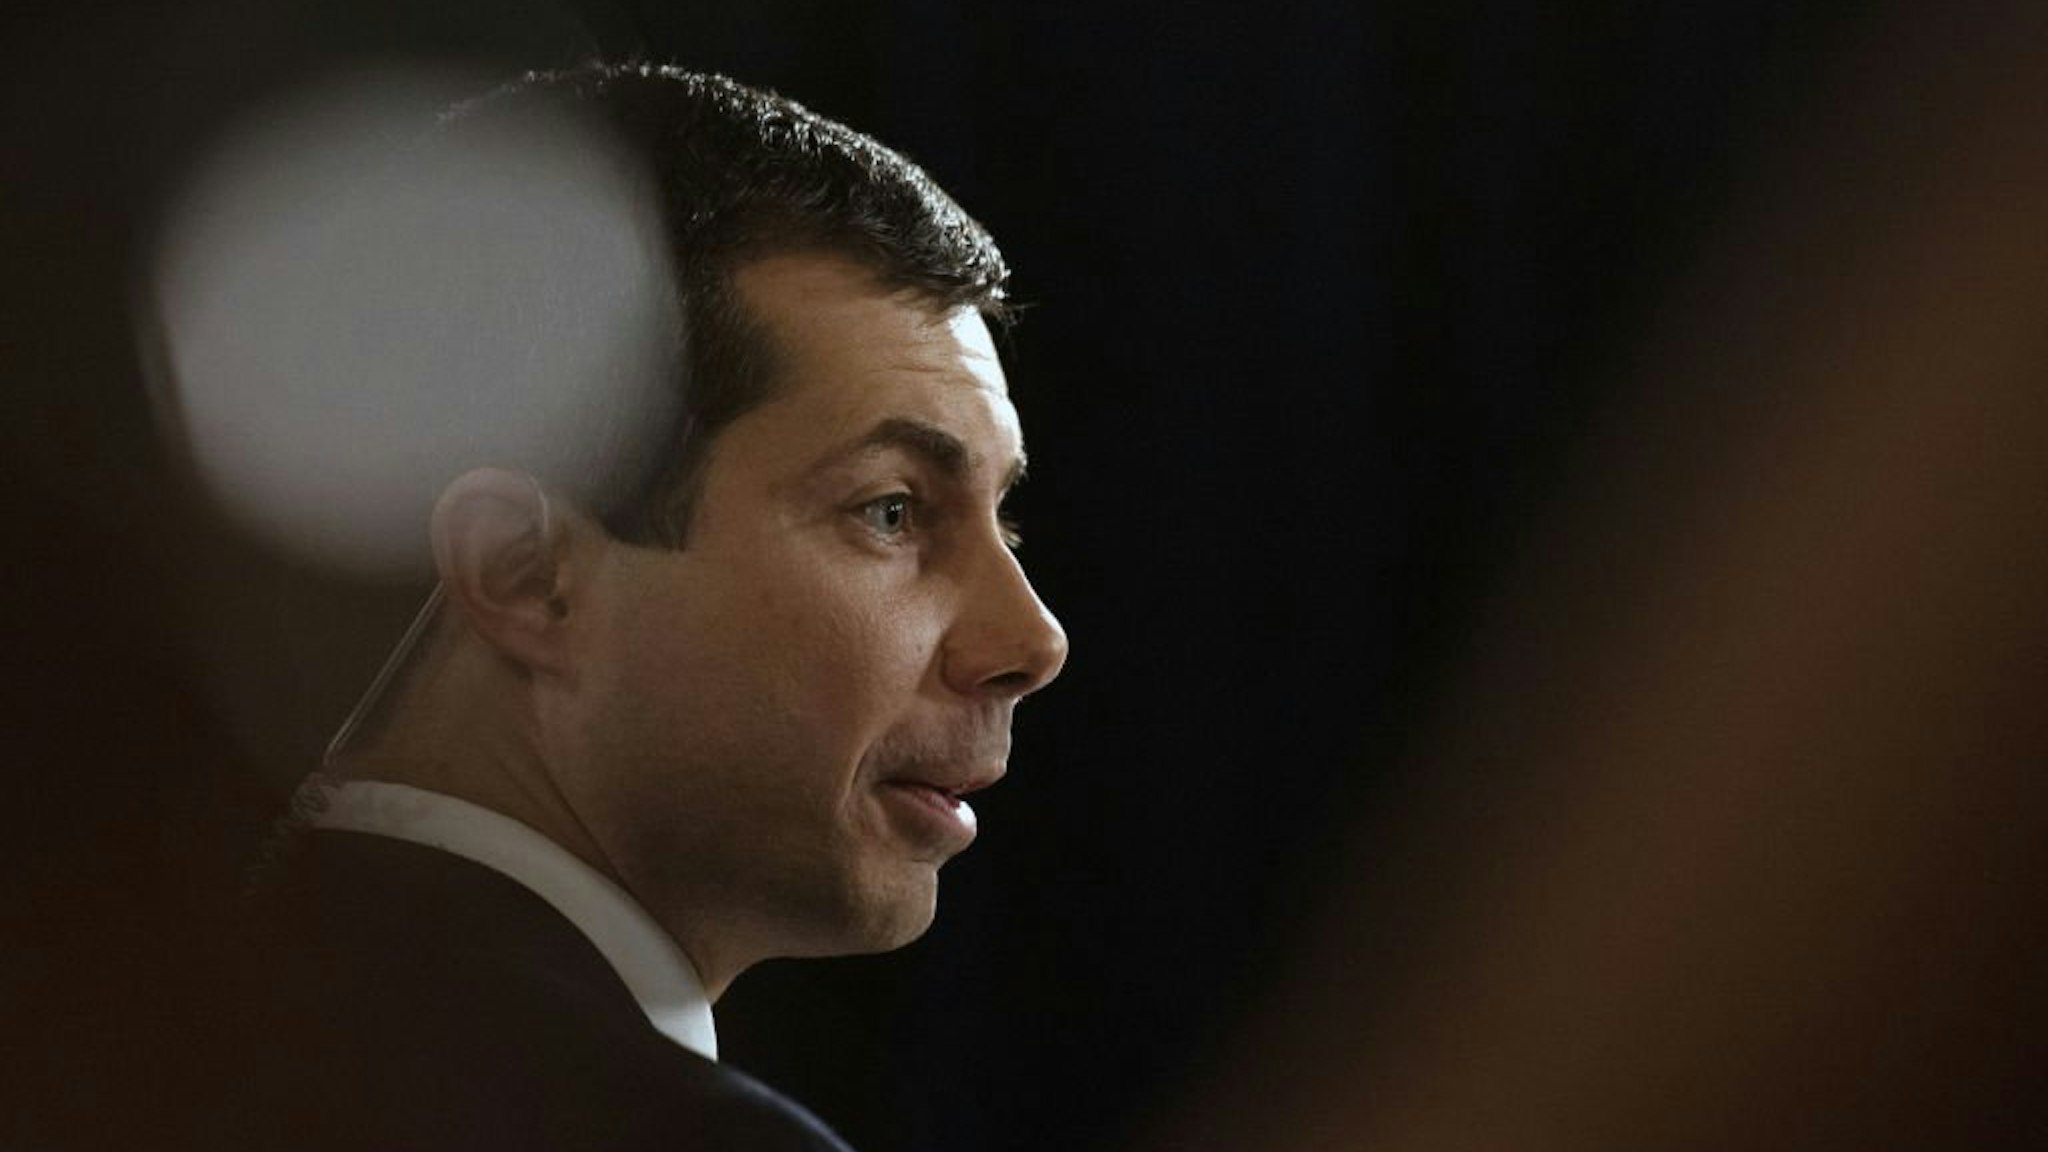 Pete Buttigieg, mayor of South Bend and 2020 presidential candidate, speaks with members of the media following the Democratic presidential candidate debate in Houston, Texas, U.S., on Thursday, Sept. 12, 2019.